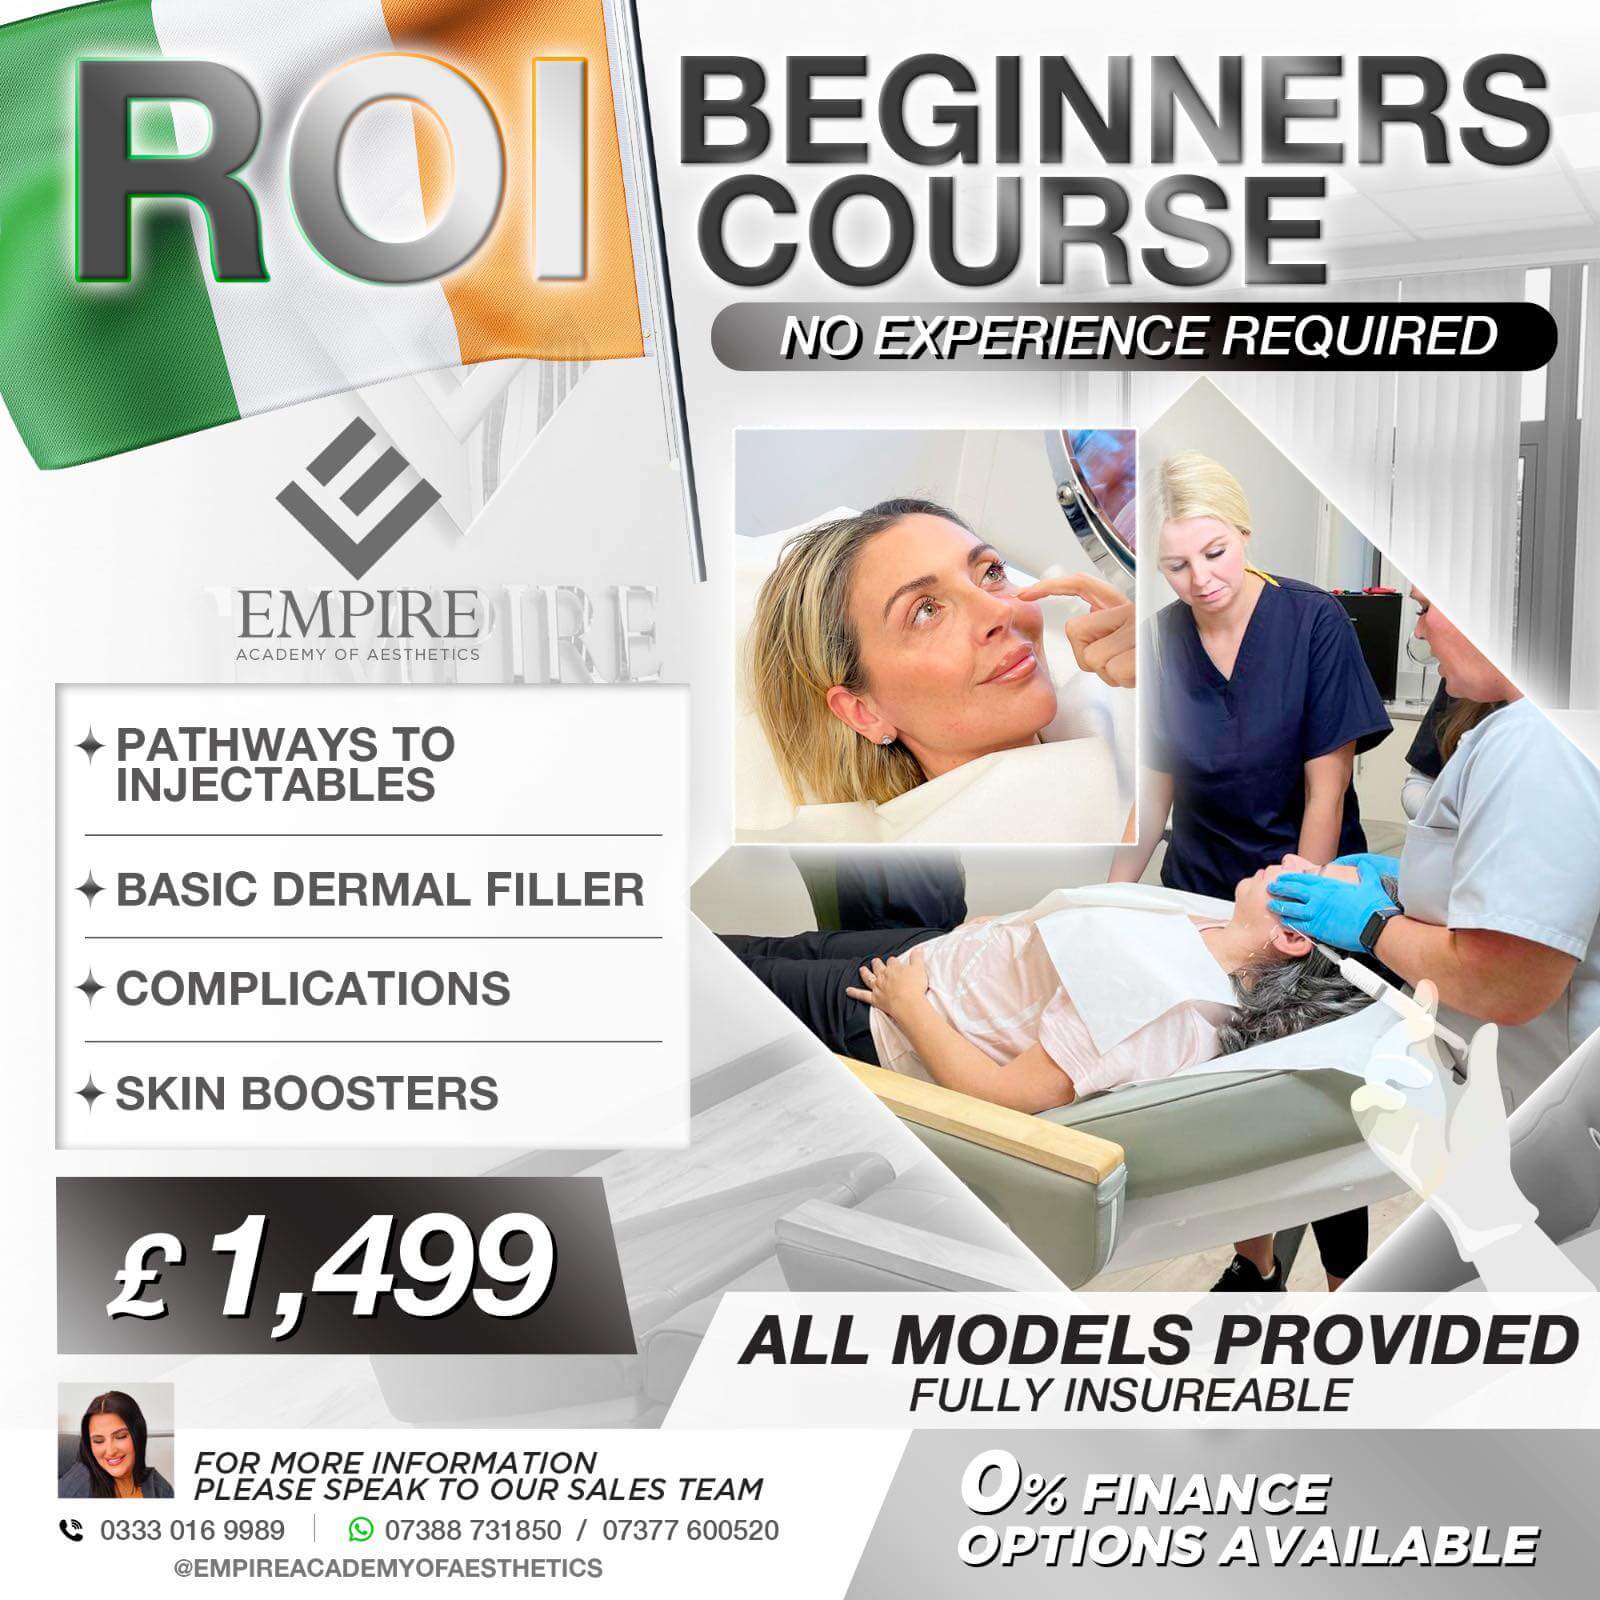 Aesthetics Course package designed for those from the Republic of Ireland. Allows beginners to become a Aesthetic practitioner.